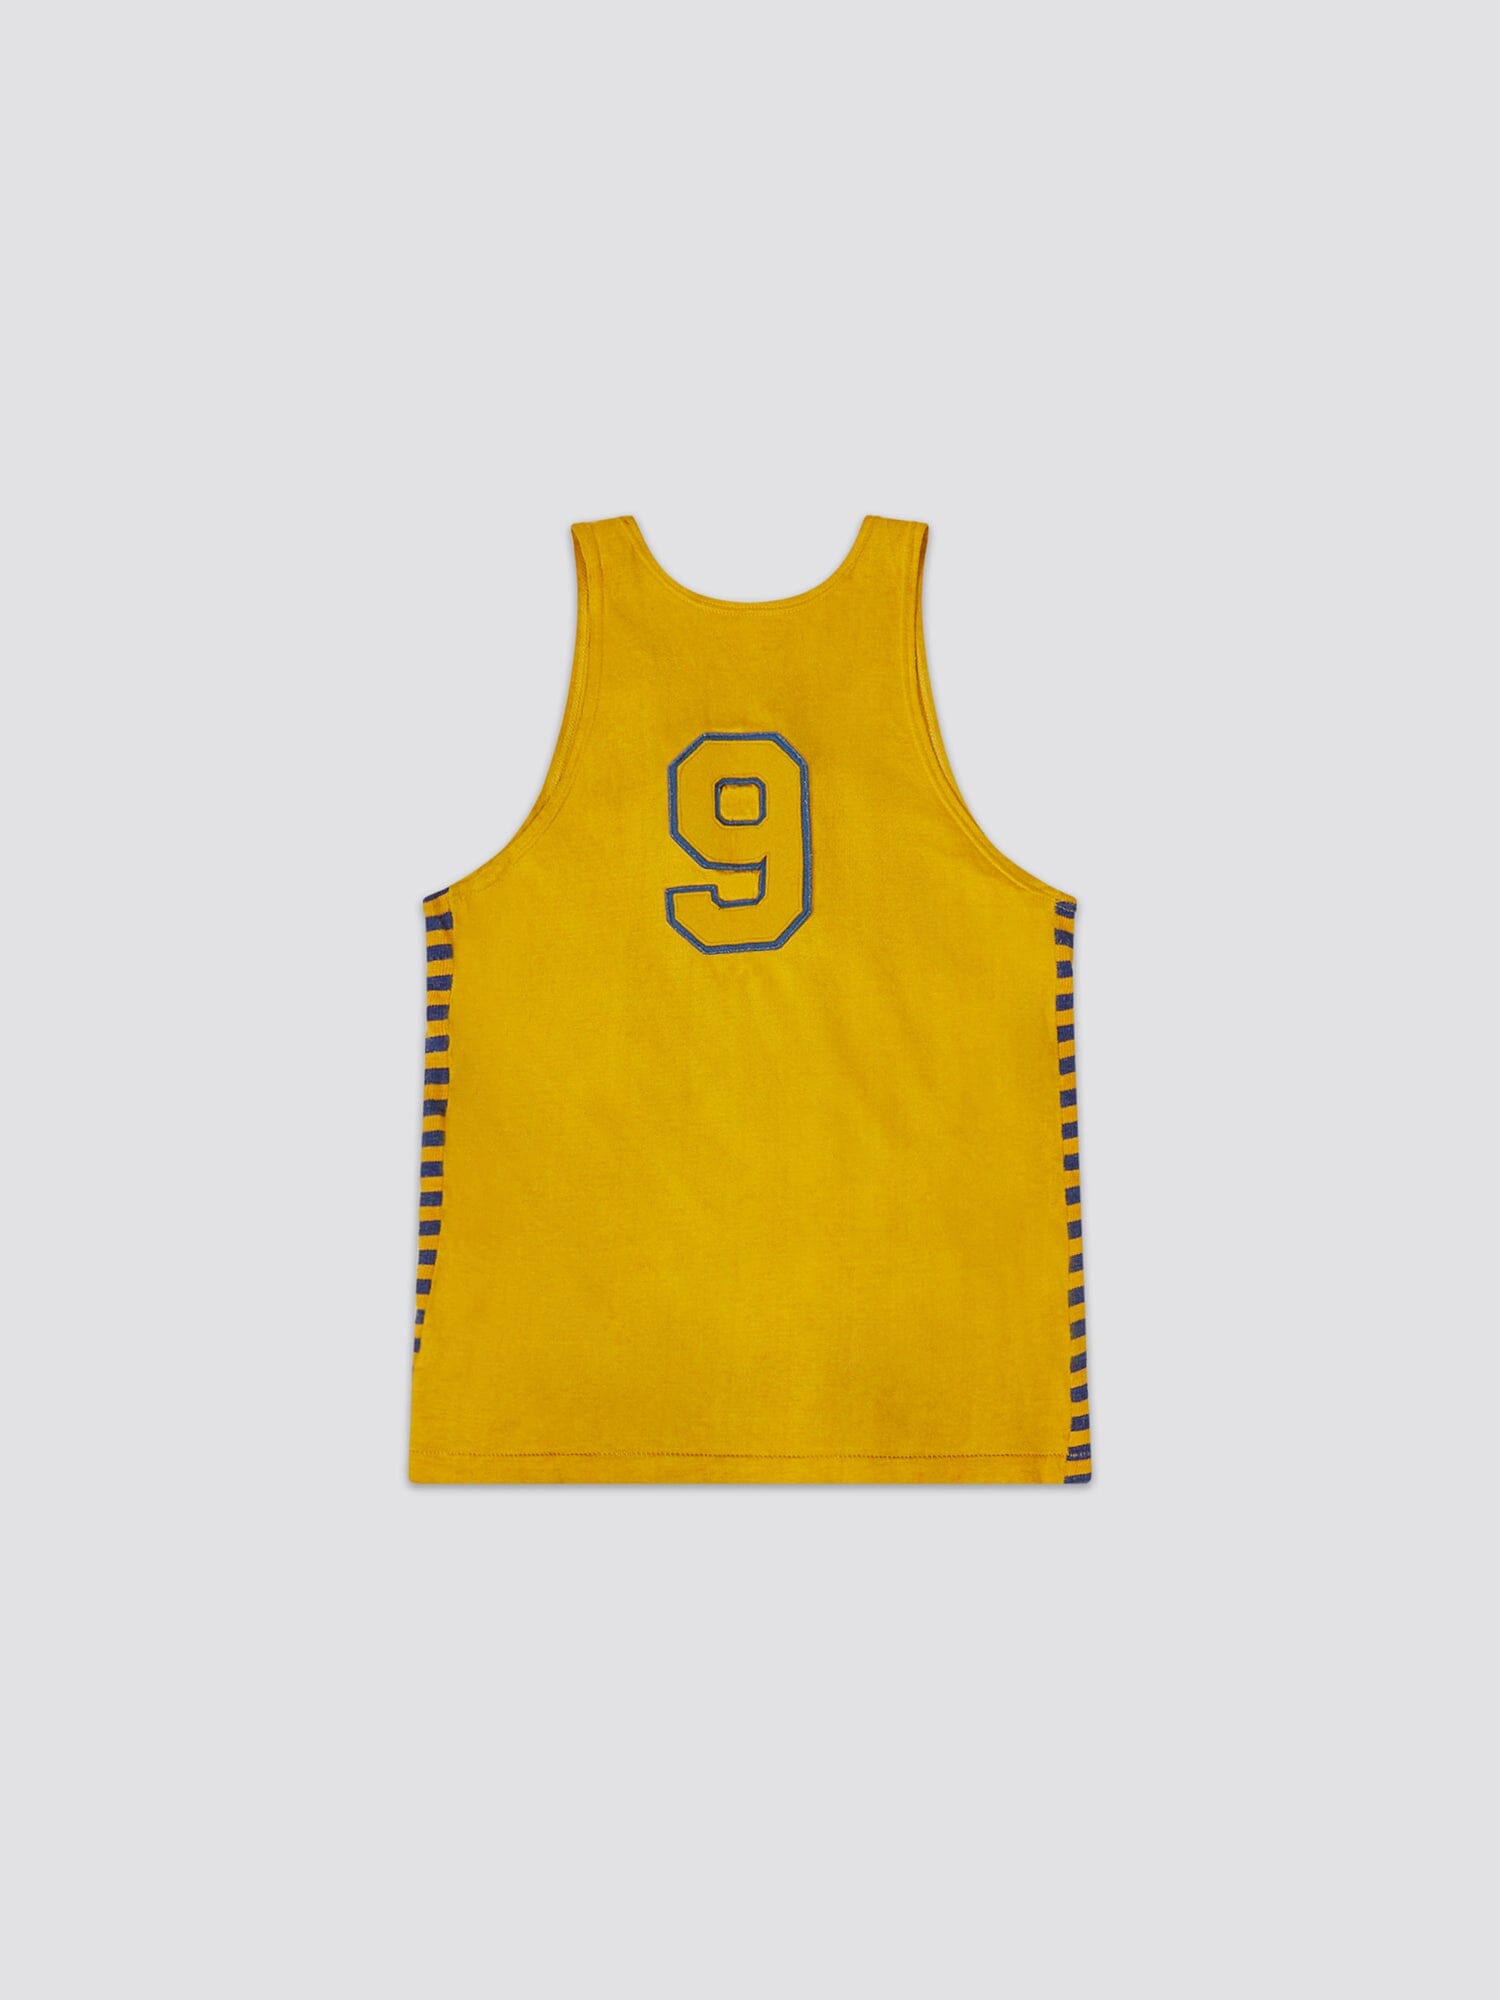 MITCHELL AFB BASKETBALL JERSEY TOP Alpha Industries 